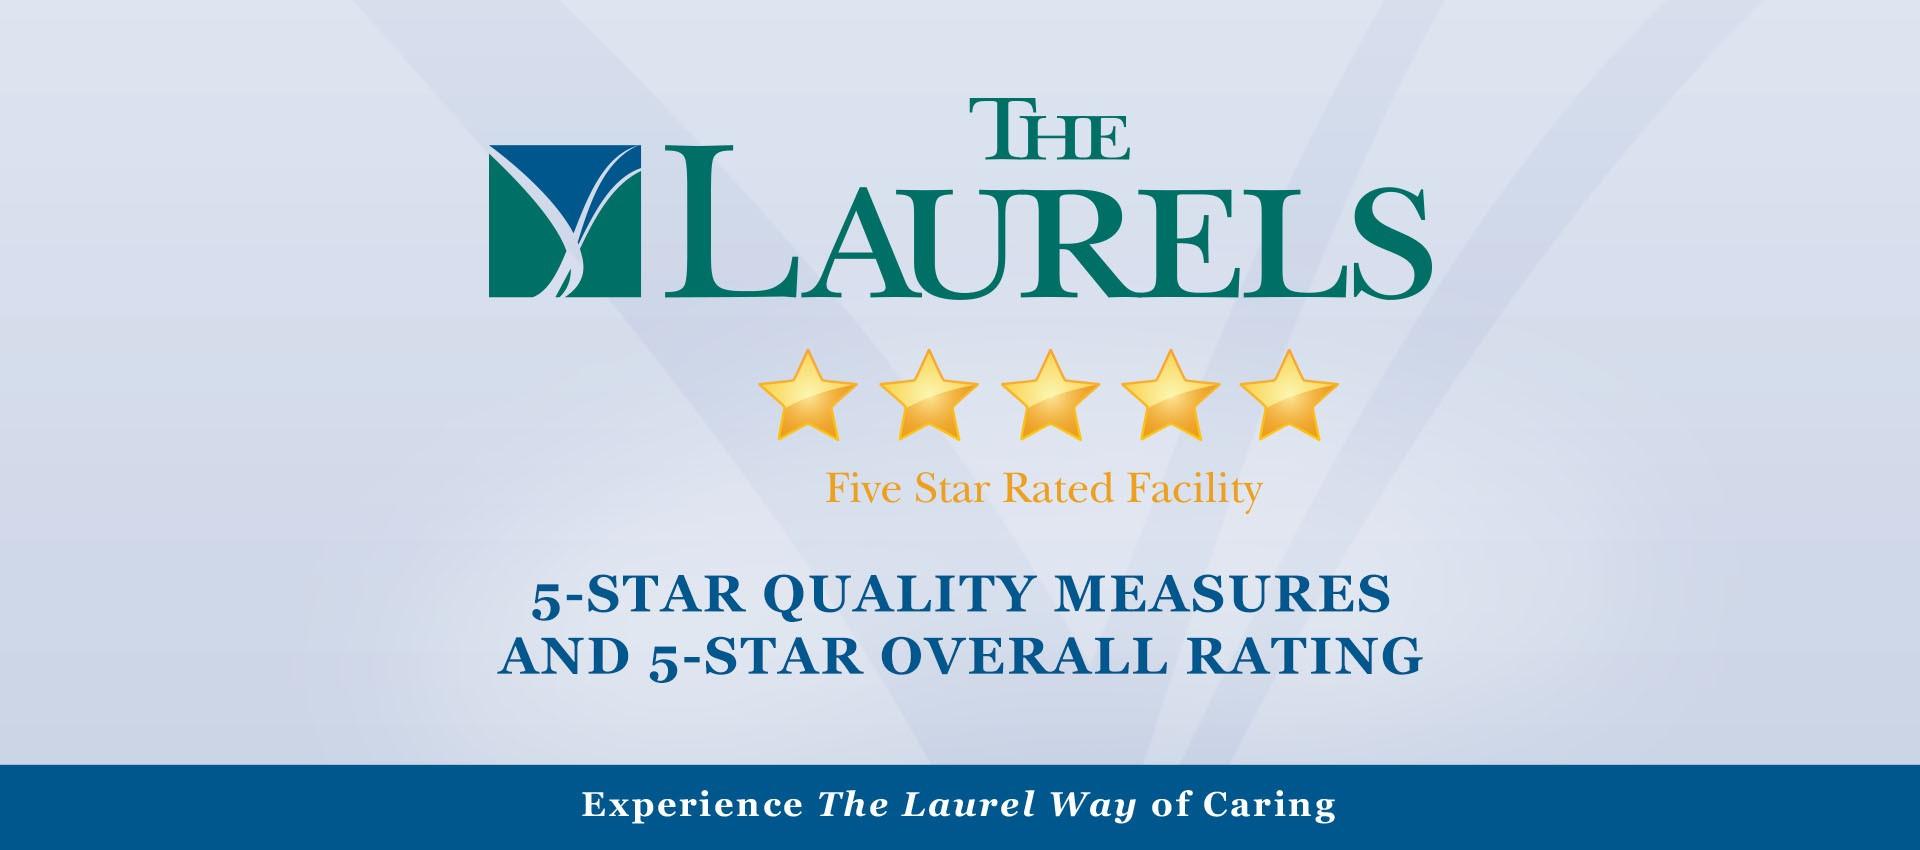 5 Star Quality Measures + Overall Rating